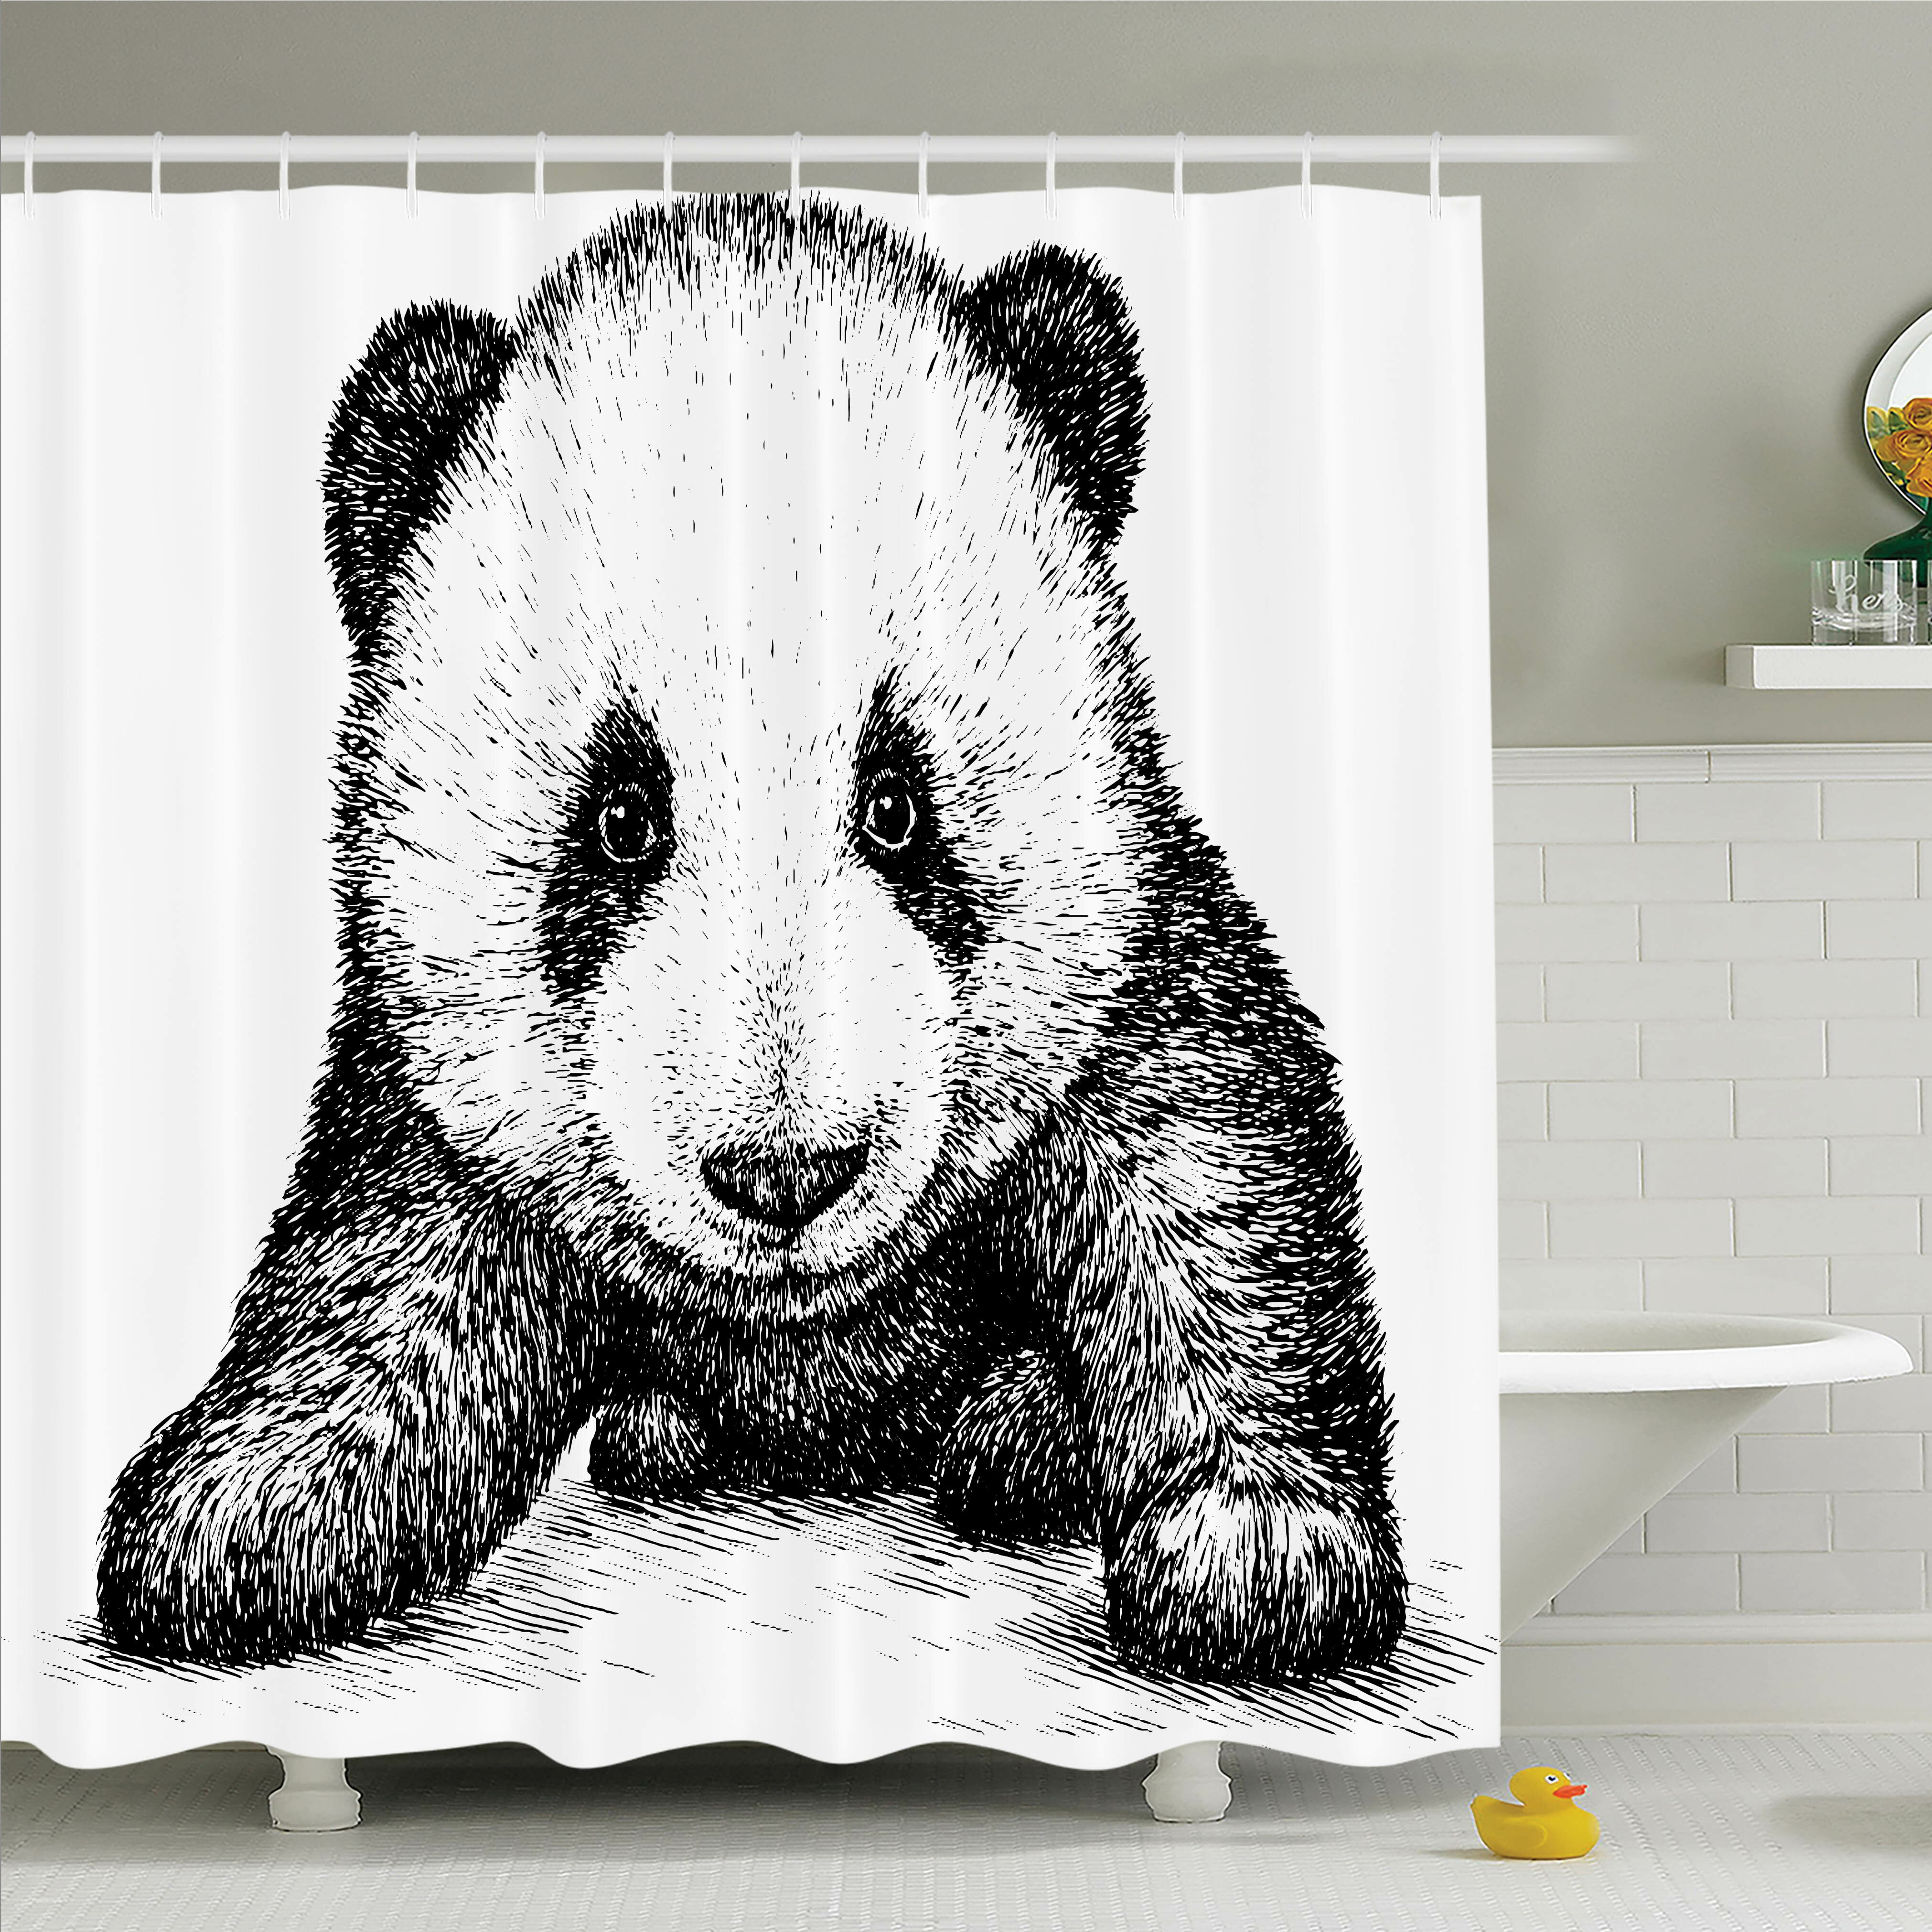 Turtle Shower Curtain Set + Hooks East Urban Home Size: 75 H x 69 W